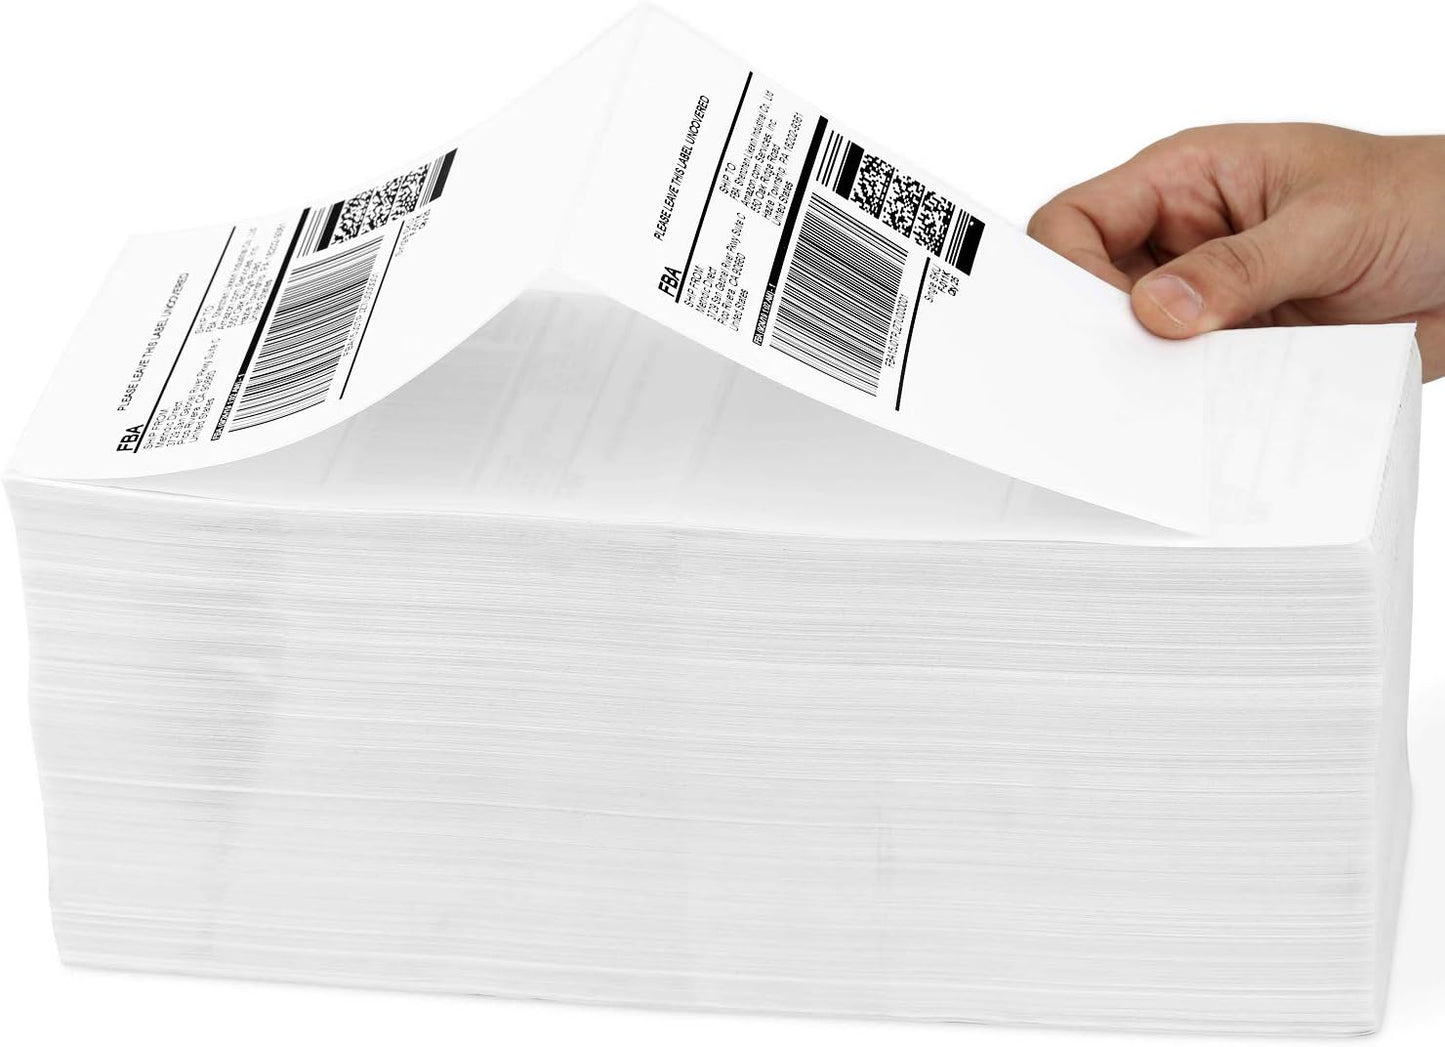 Methdic 4X6 Fold Thermal Direct Shipping Label for UPS USPS 1 Stack (1000 Labels)